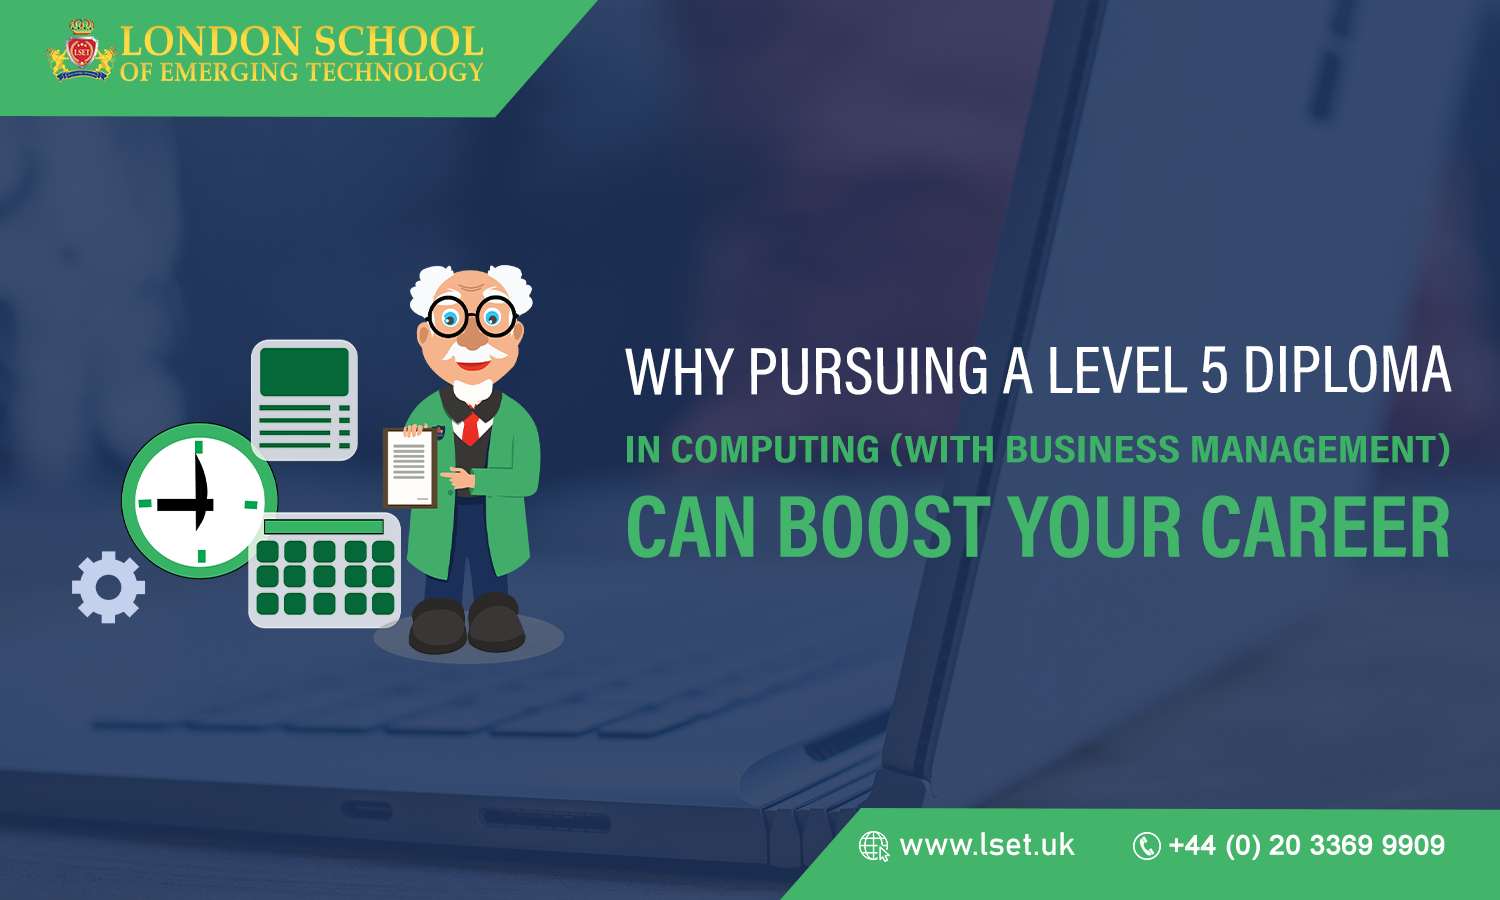 Why Pursuing a Level 5 Diploma in Computing (with Business Management) Can Boost Your Career